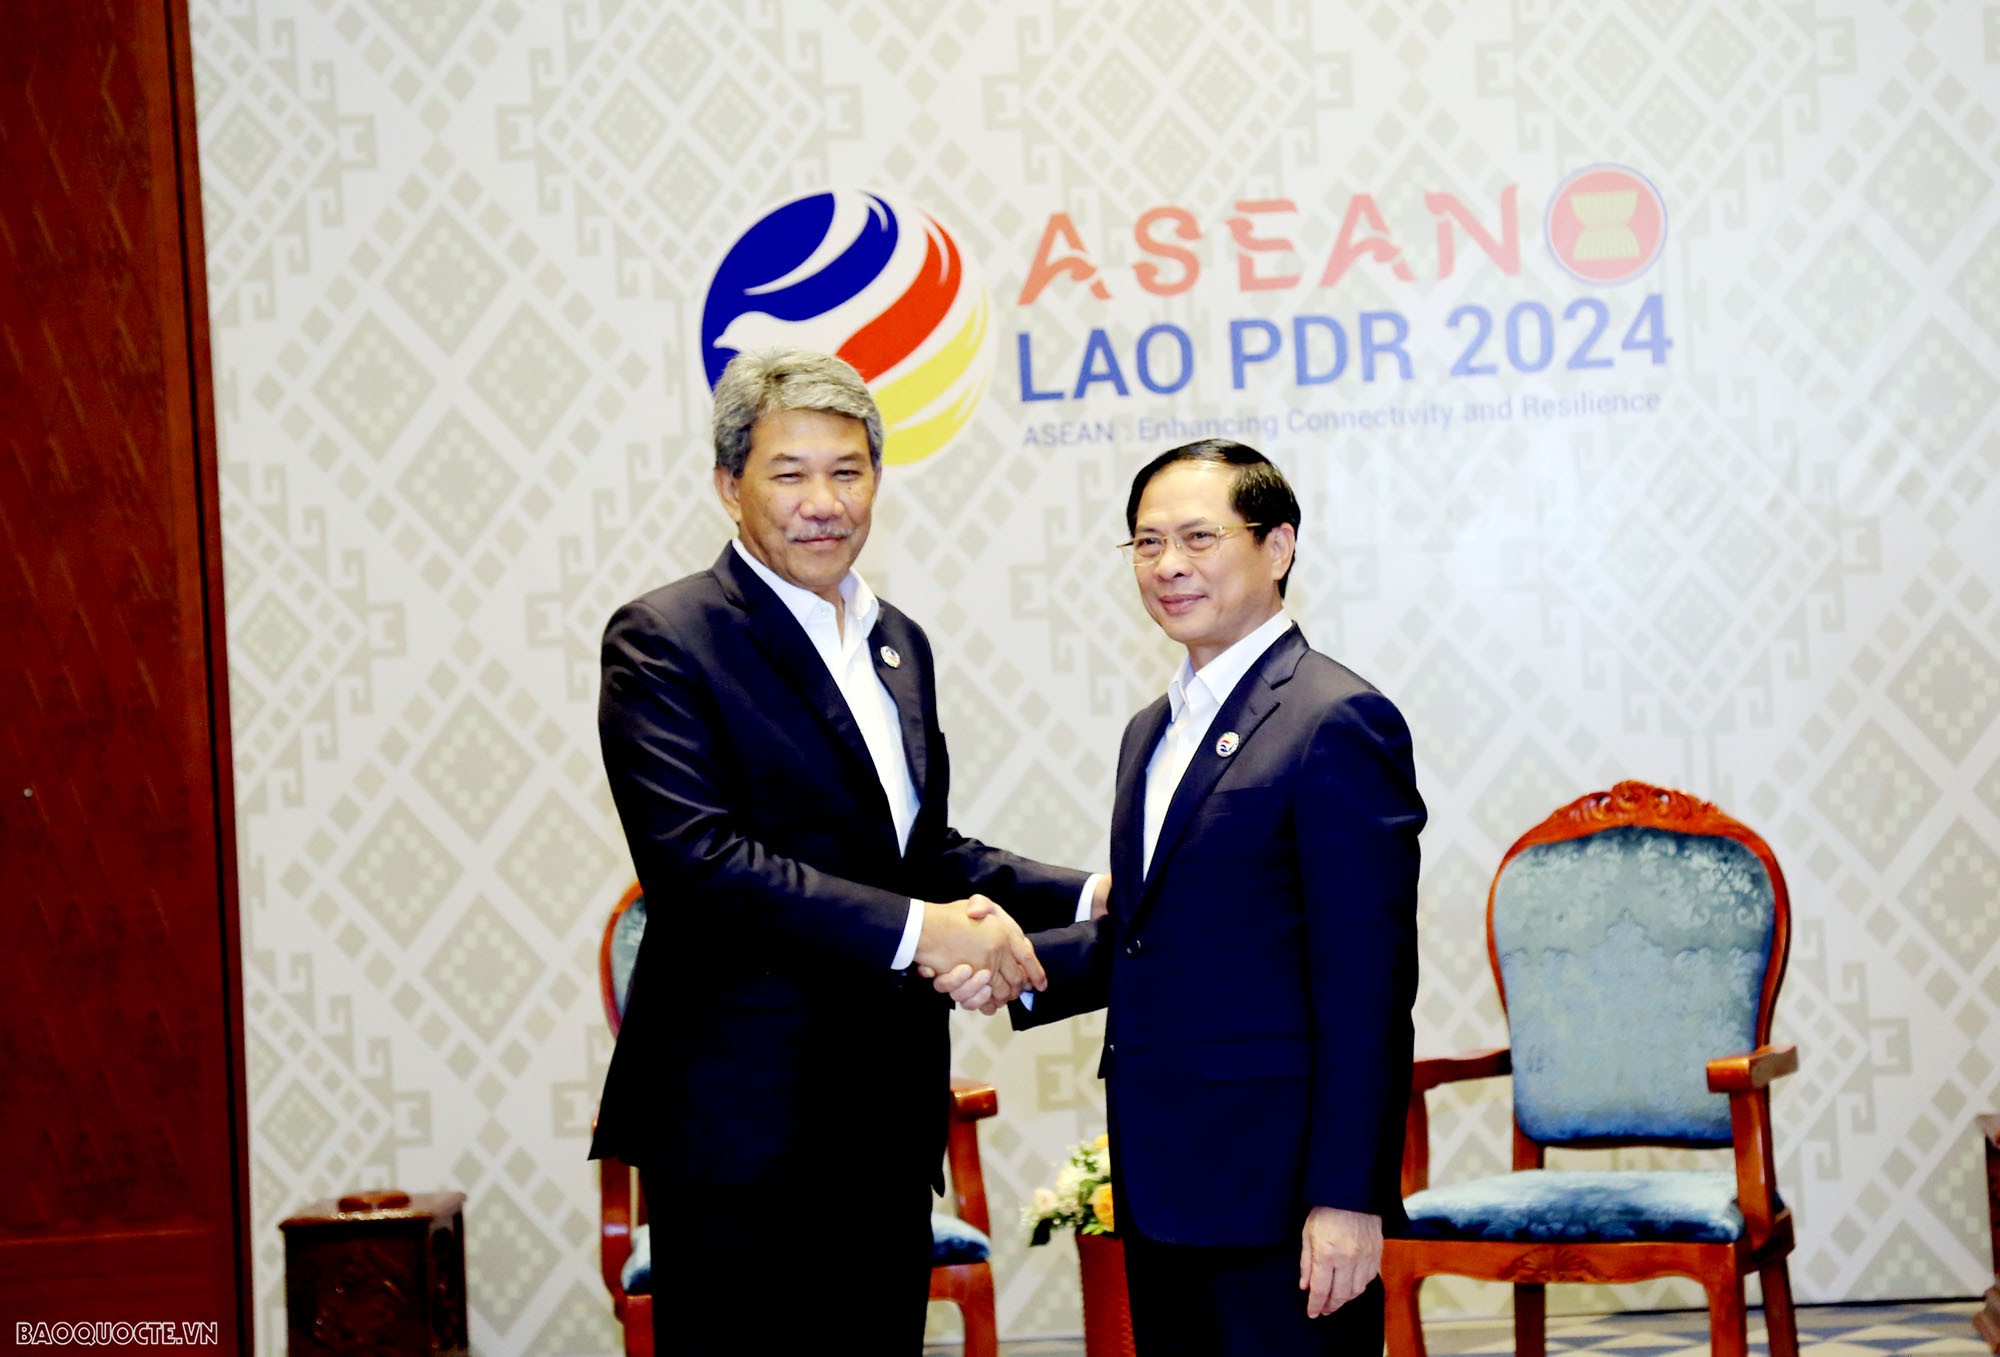 Foreign Minister meets Thai, Malaysian counterparts in Luang Phrabang, Laos